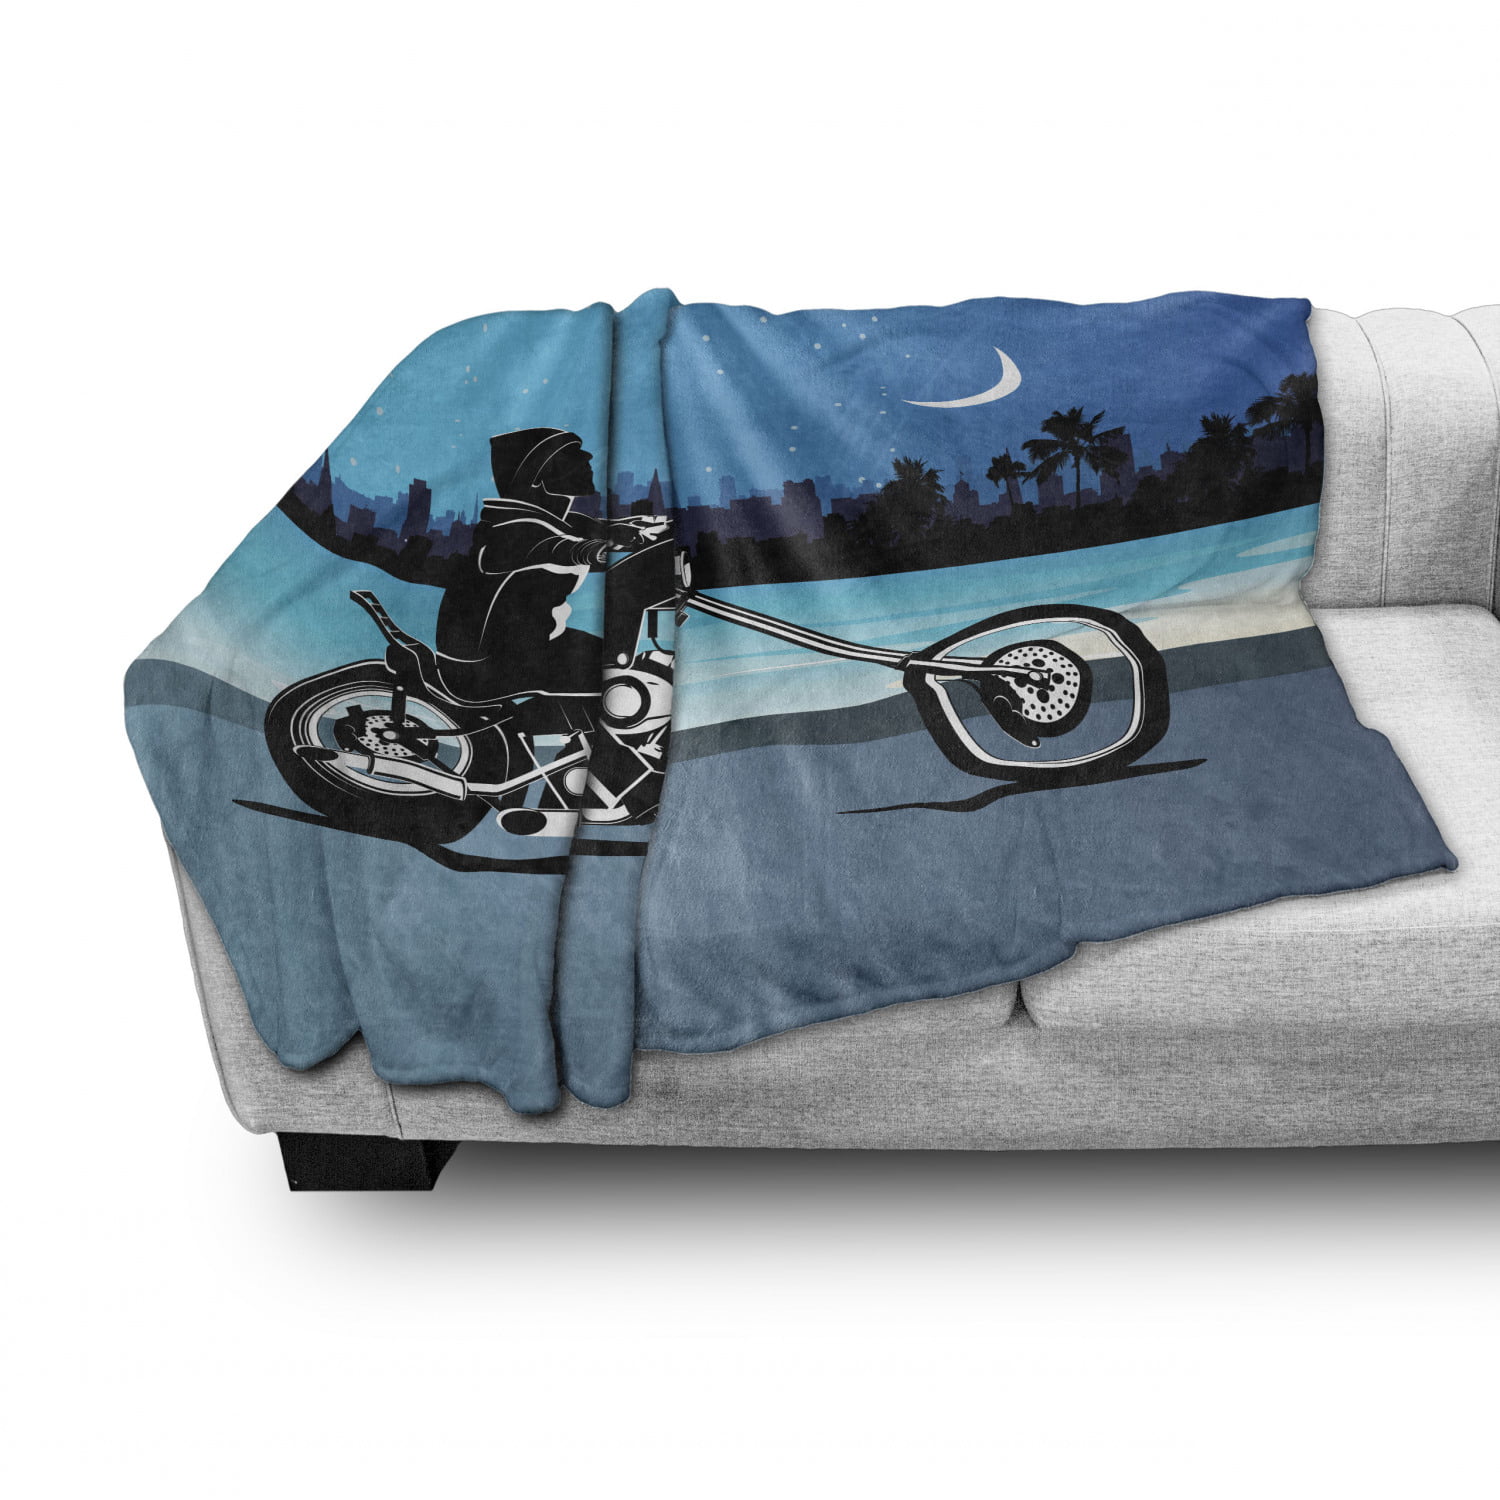 Ambesonne Motorcycle Soft Flannel Fleece Throw Blanket Art with Chopper Motorcycle Biker Riding Starry Night Sky Cityscape Silhouette Cozy Plush for Indoor and Outdoor Use Black Navy 50 x 60